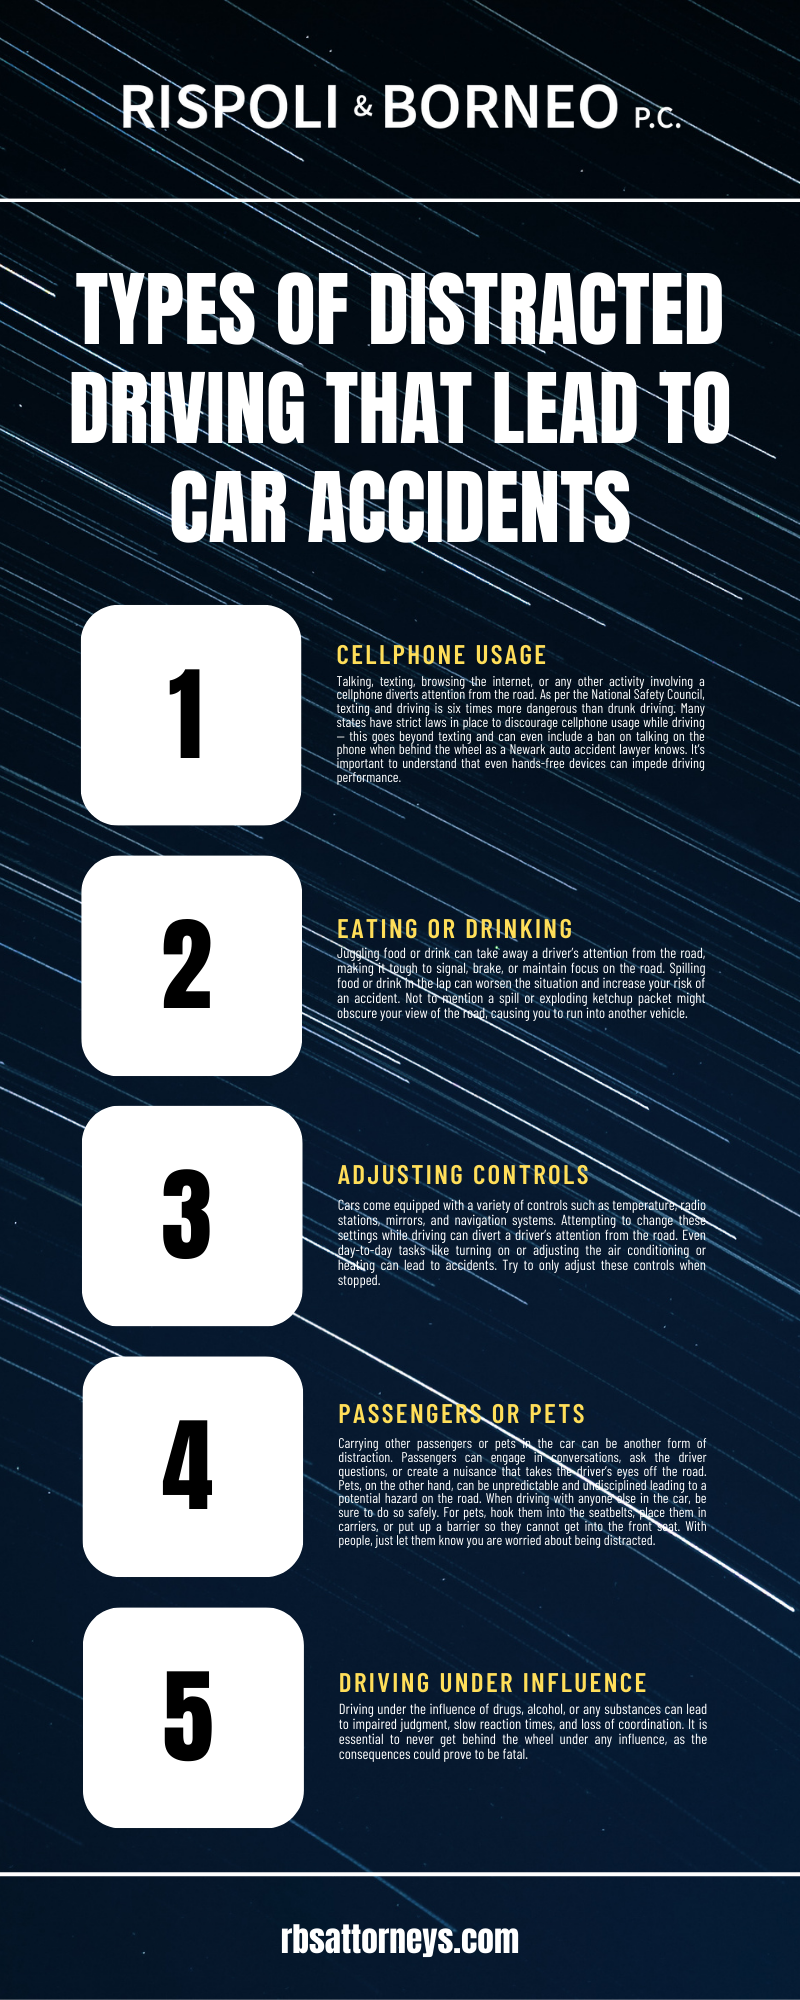 TYPES OF DISTRACTED DRIVING THAT LEAD TO CAR ACCIDENTS INFOGRAPHIC